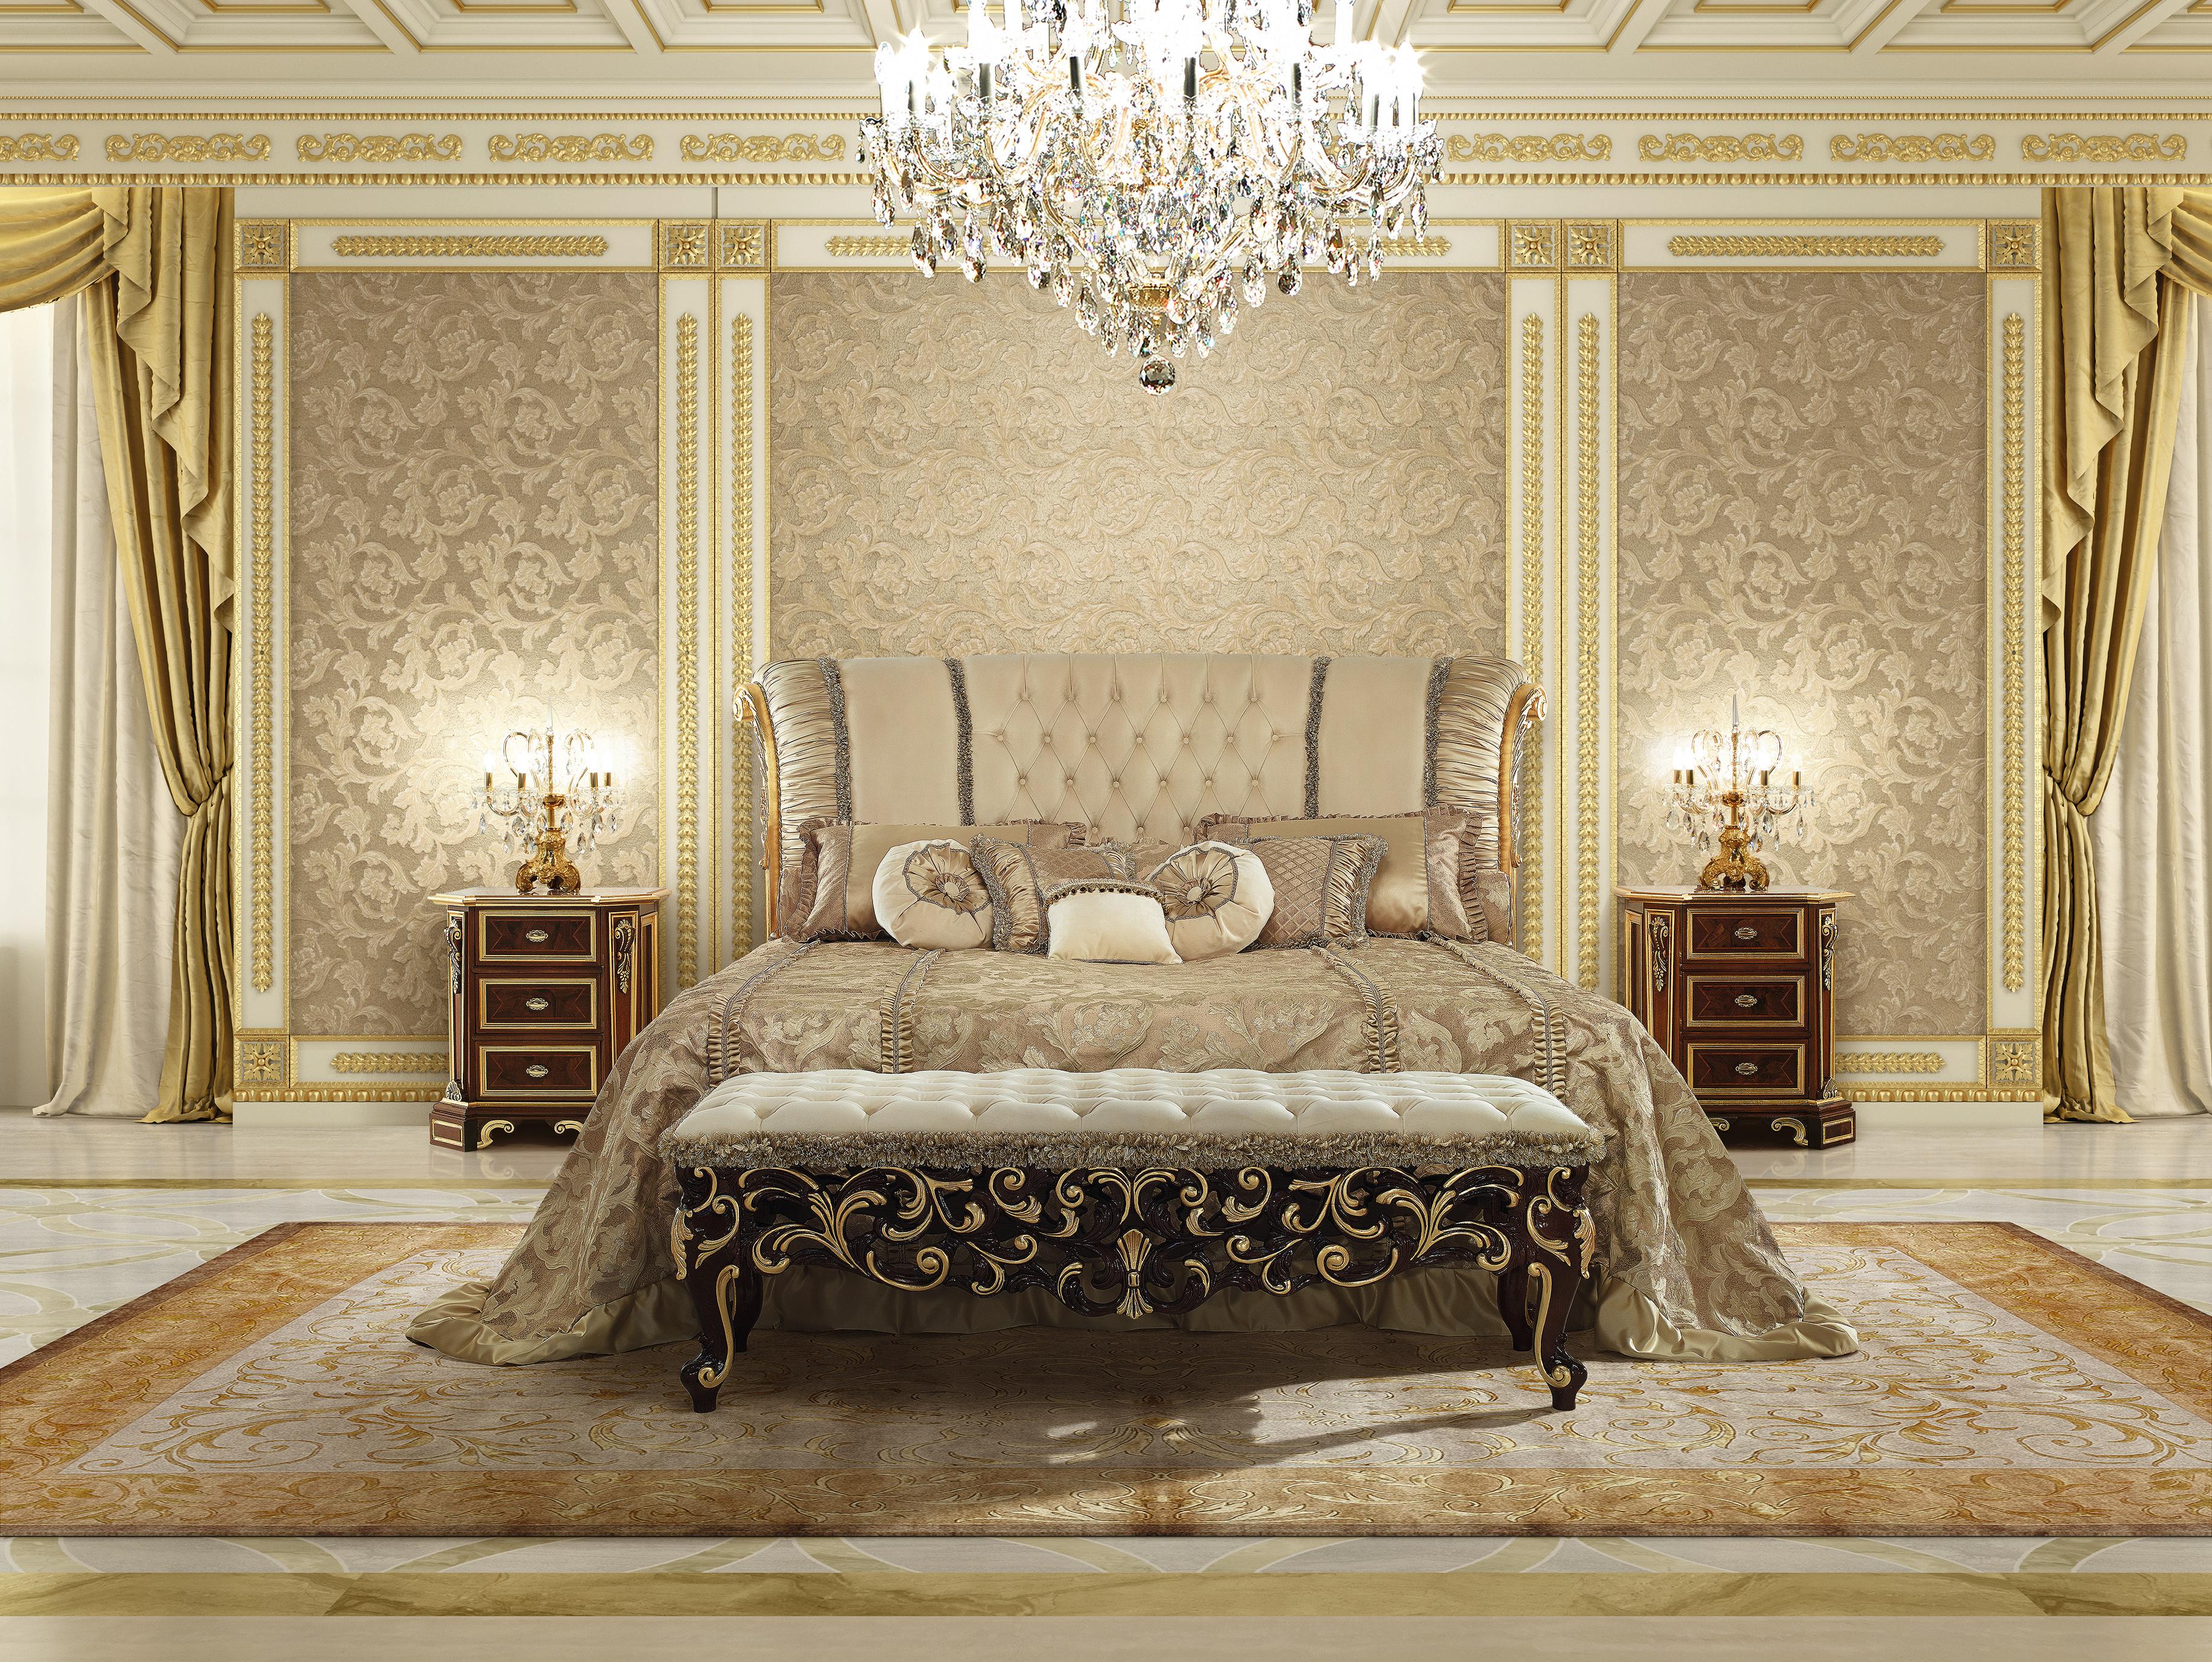 A unique complement to one of Modenese Interiors exclusively luxury bed designs, this bed bench conveys an absolute sense of timeless relax. Softly and elegantly upholstered with a precious ivory leather, enhanced with a tufted profile. The